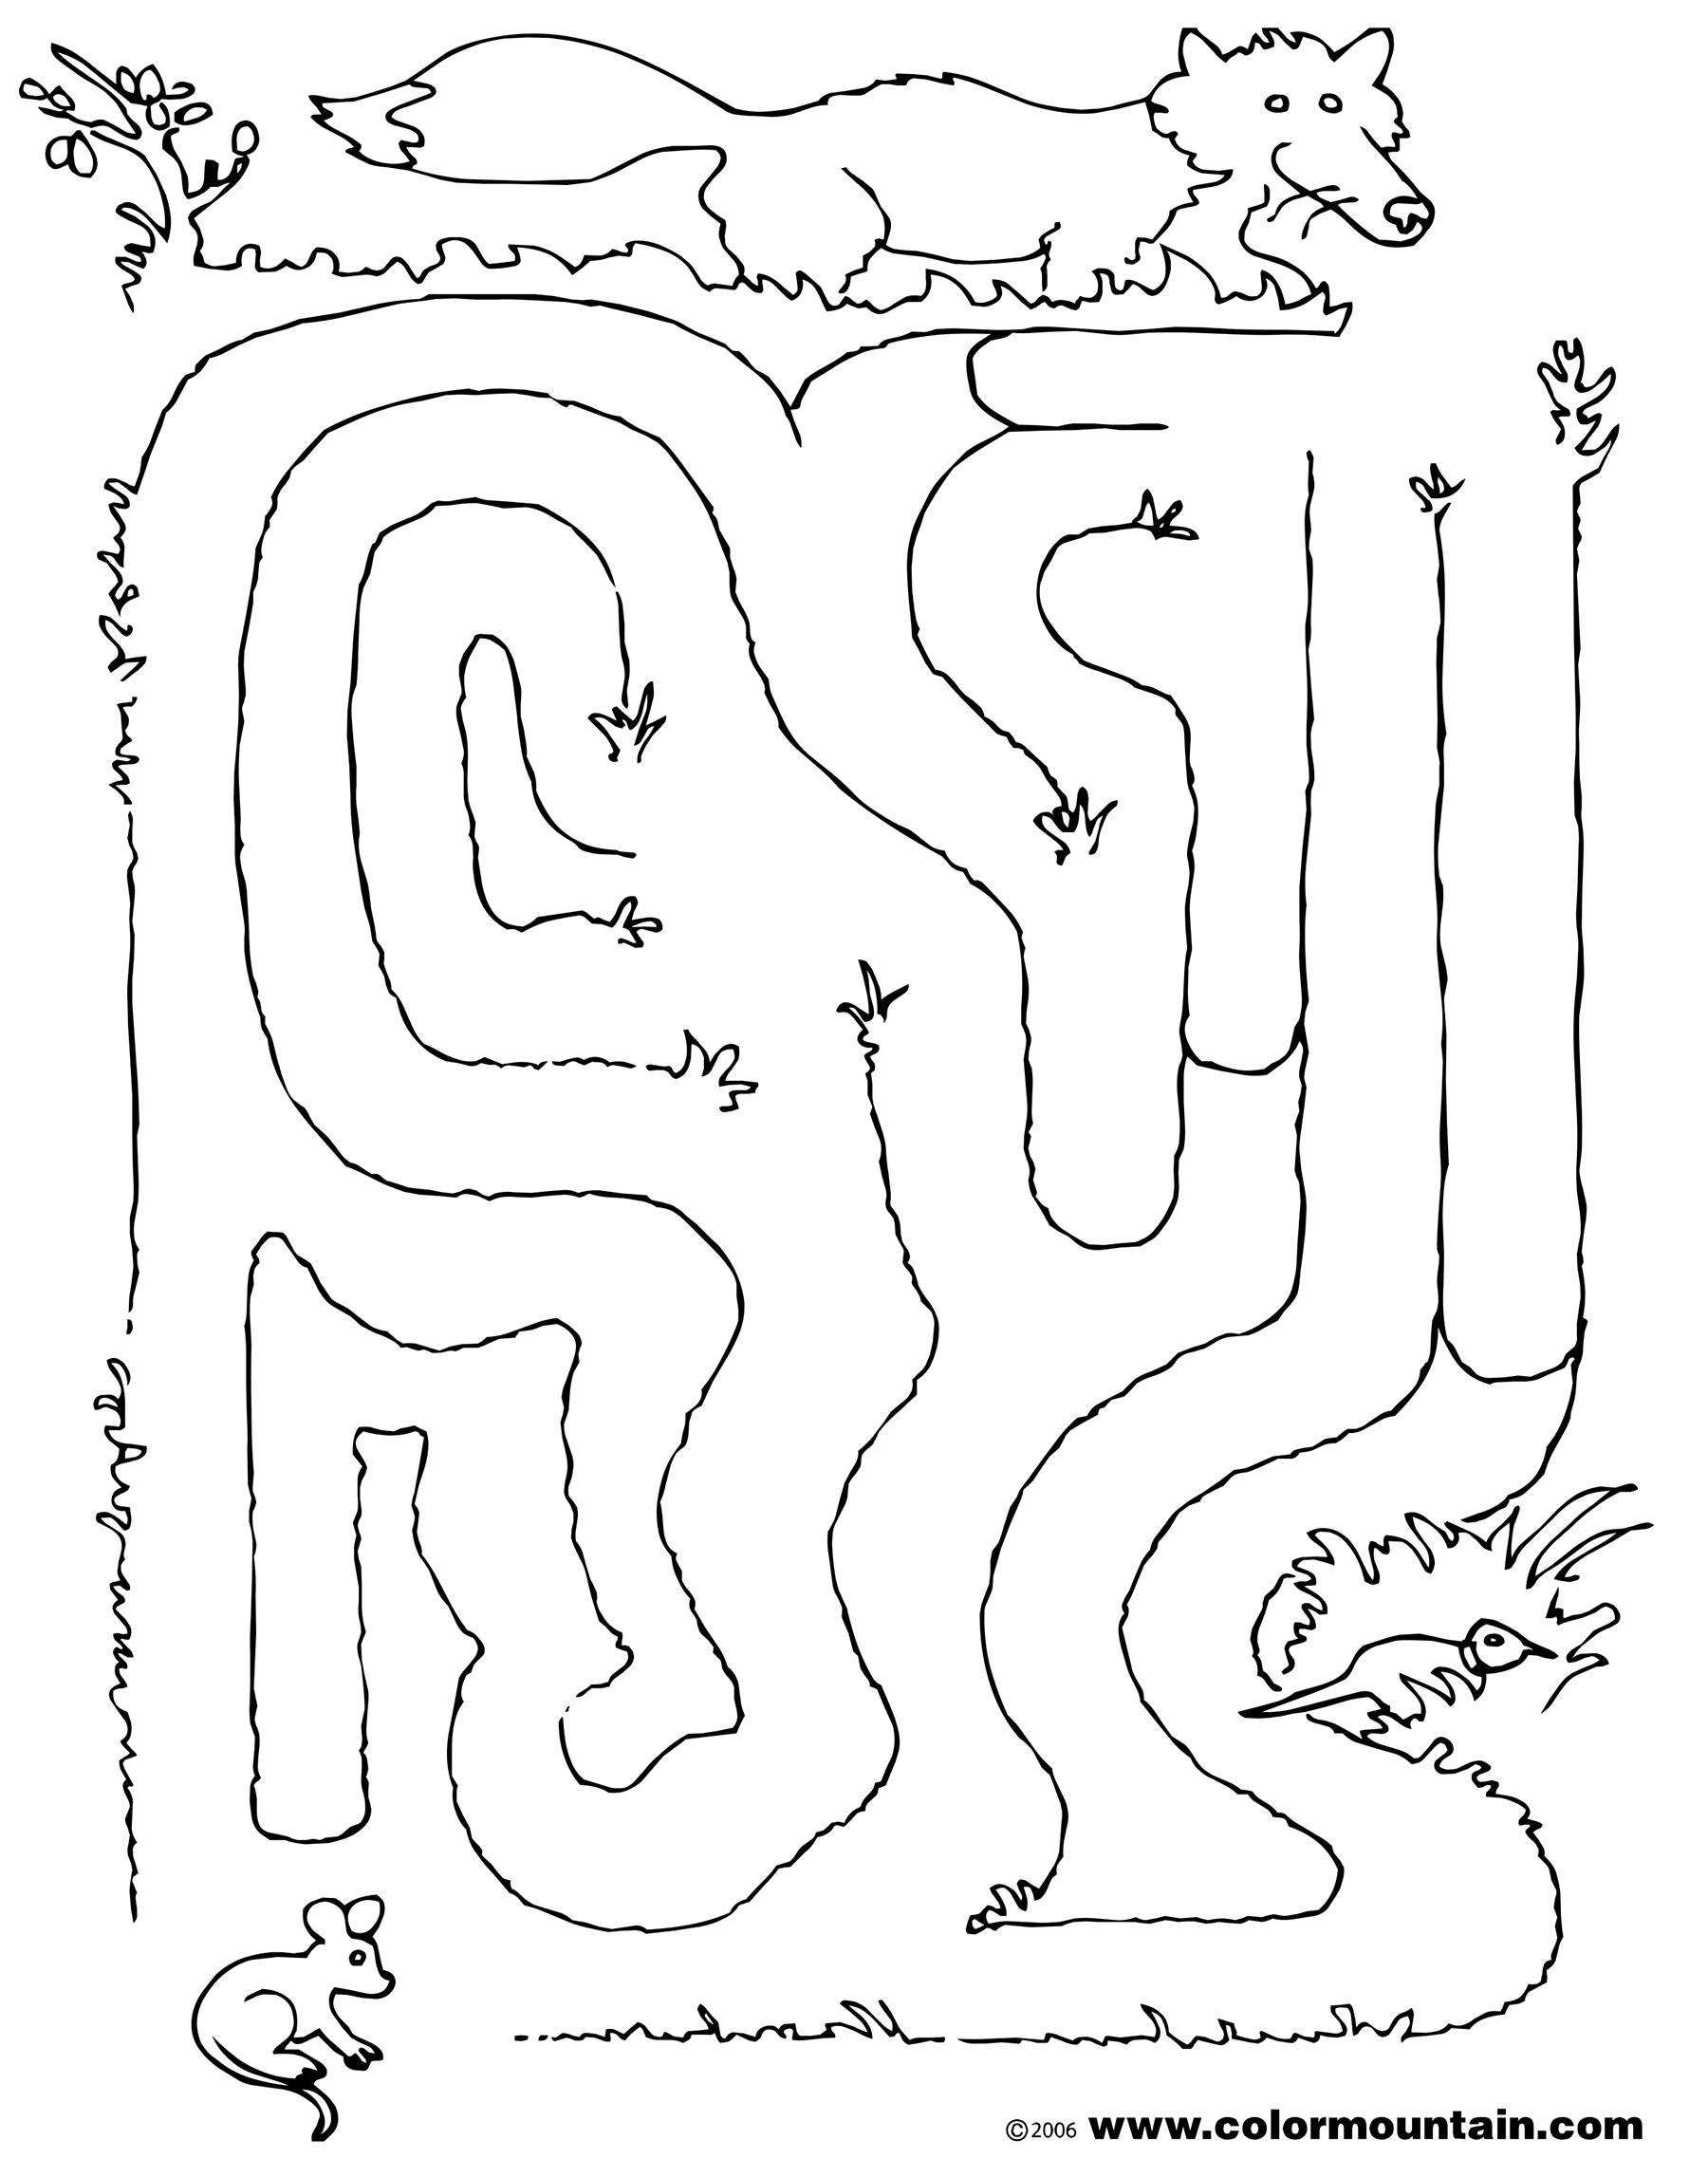 Coloring page: Labyrinths (Educational) #126482 - Free Printable Coloring Pages